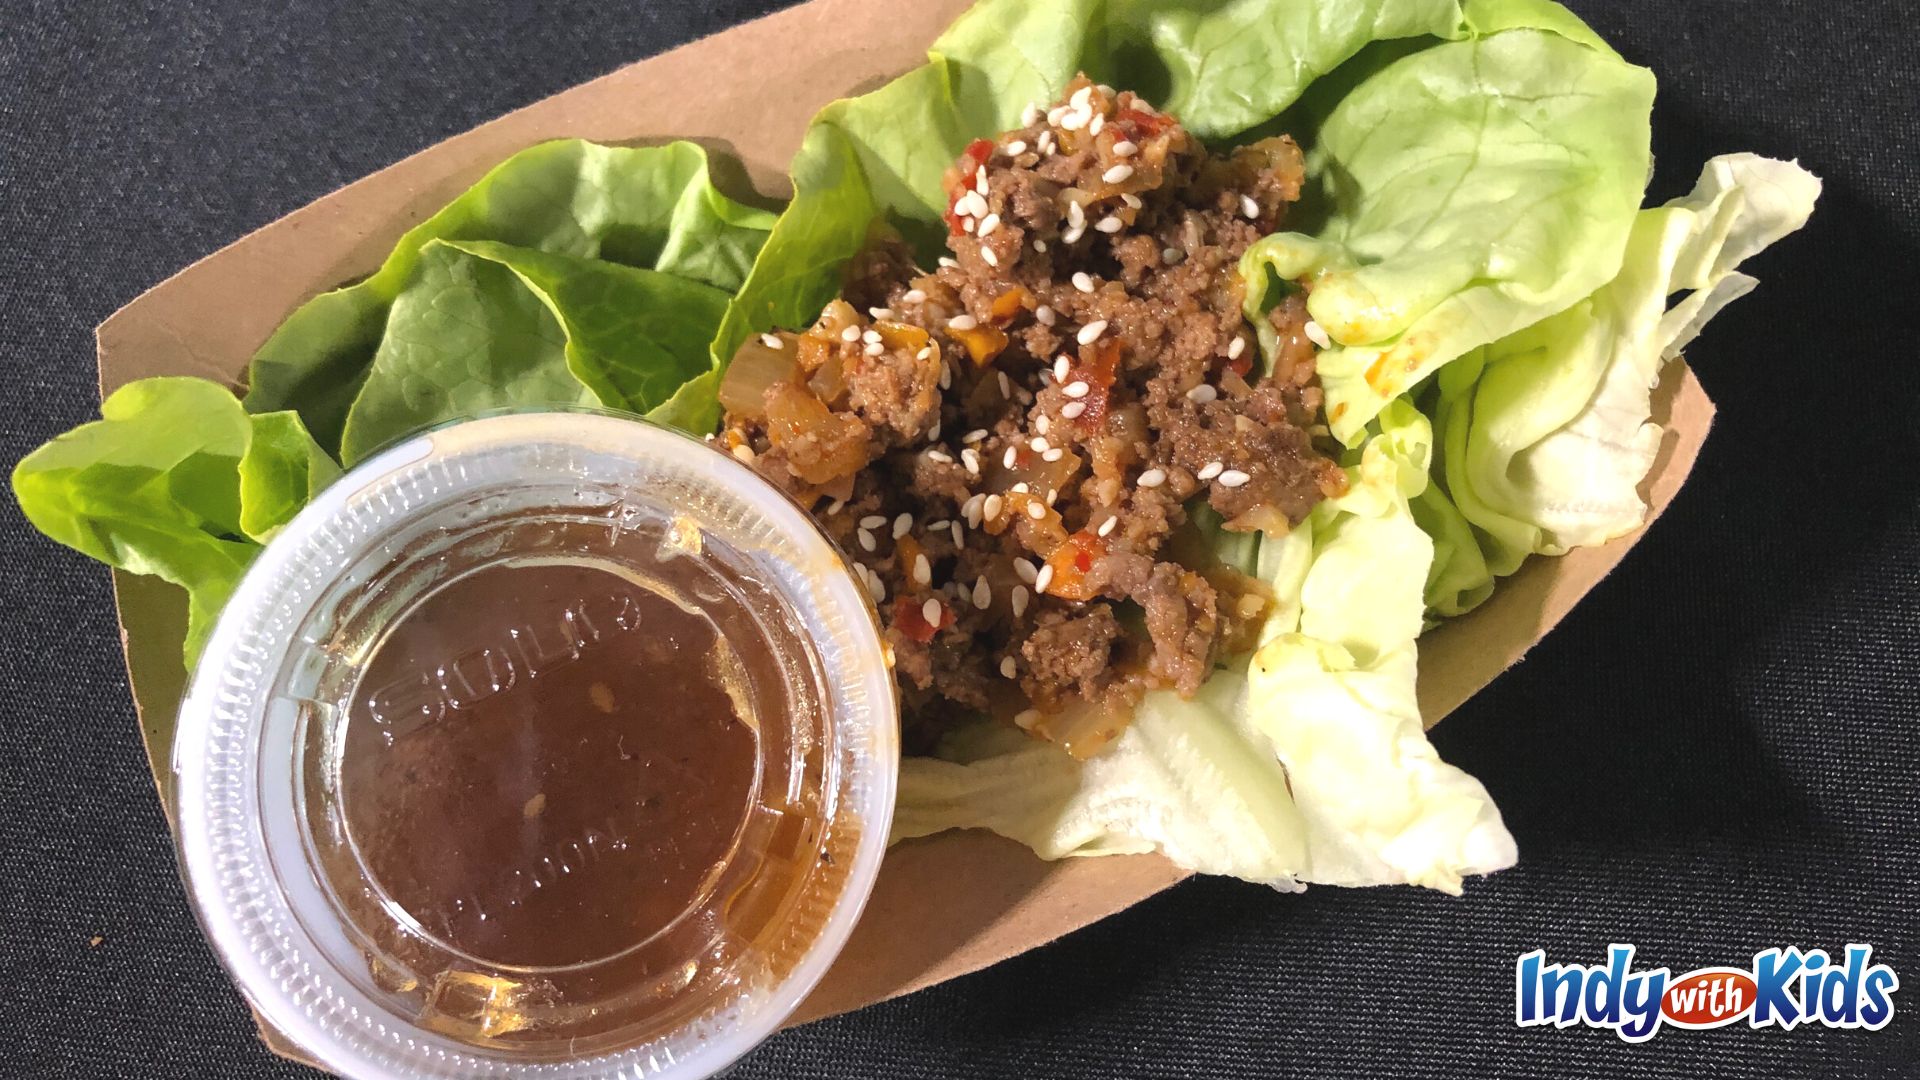 Date Night at the Fair: Eat your way around the fairgrounds.